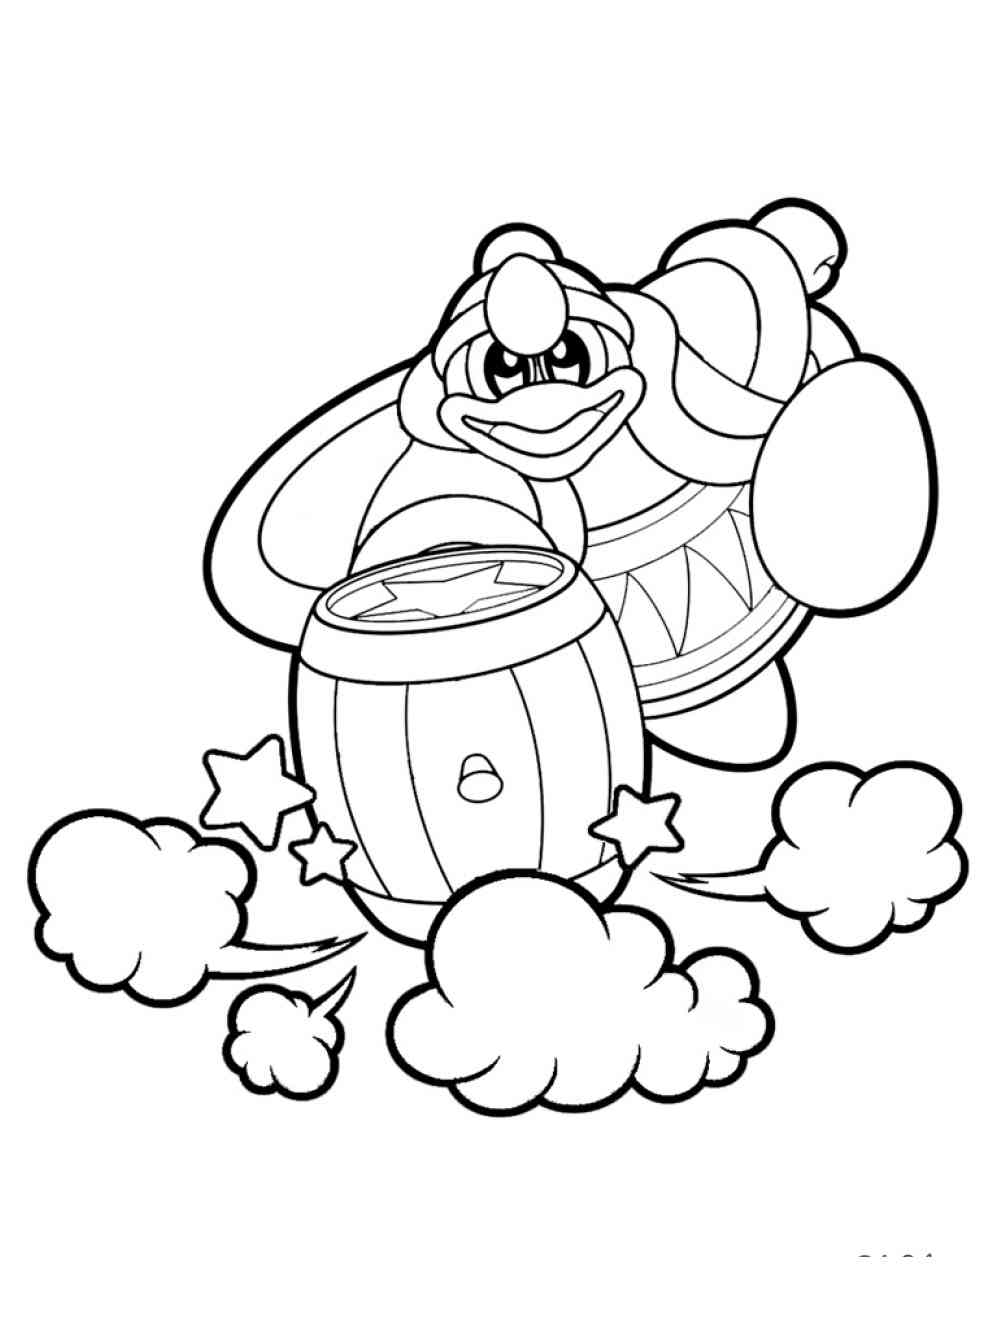 King Dedede with Hammer coloring page